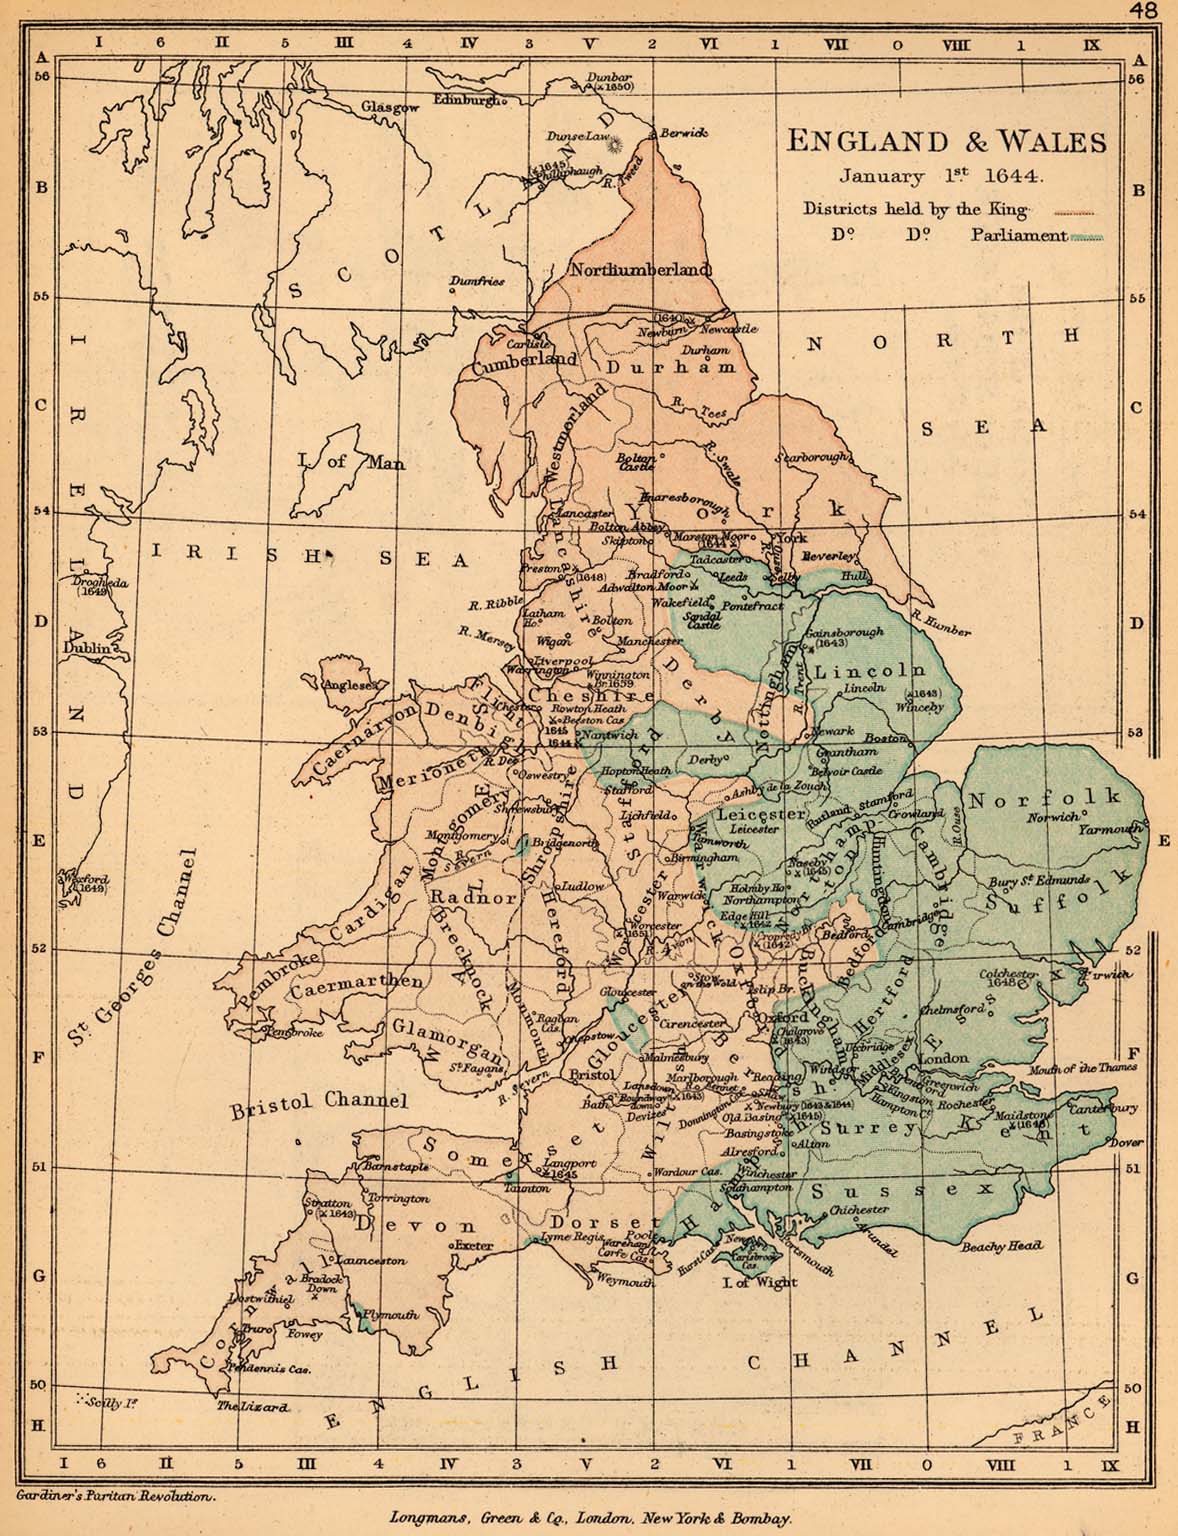 Map of England and Wales January 1, 1644